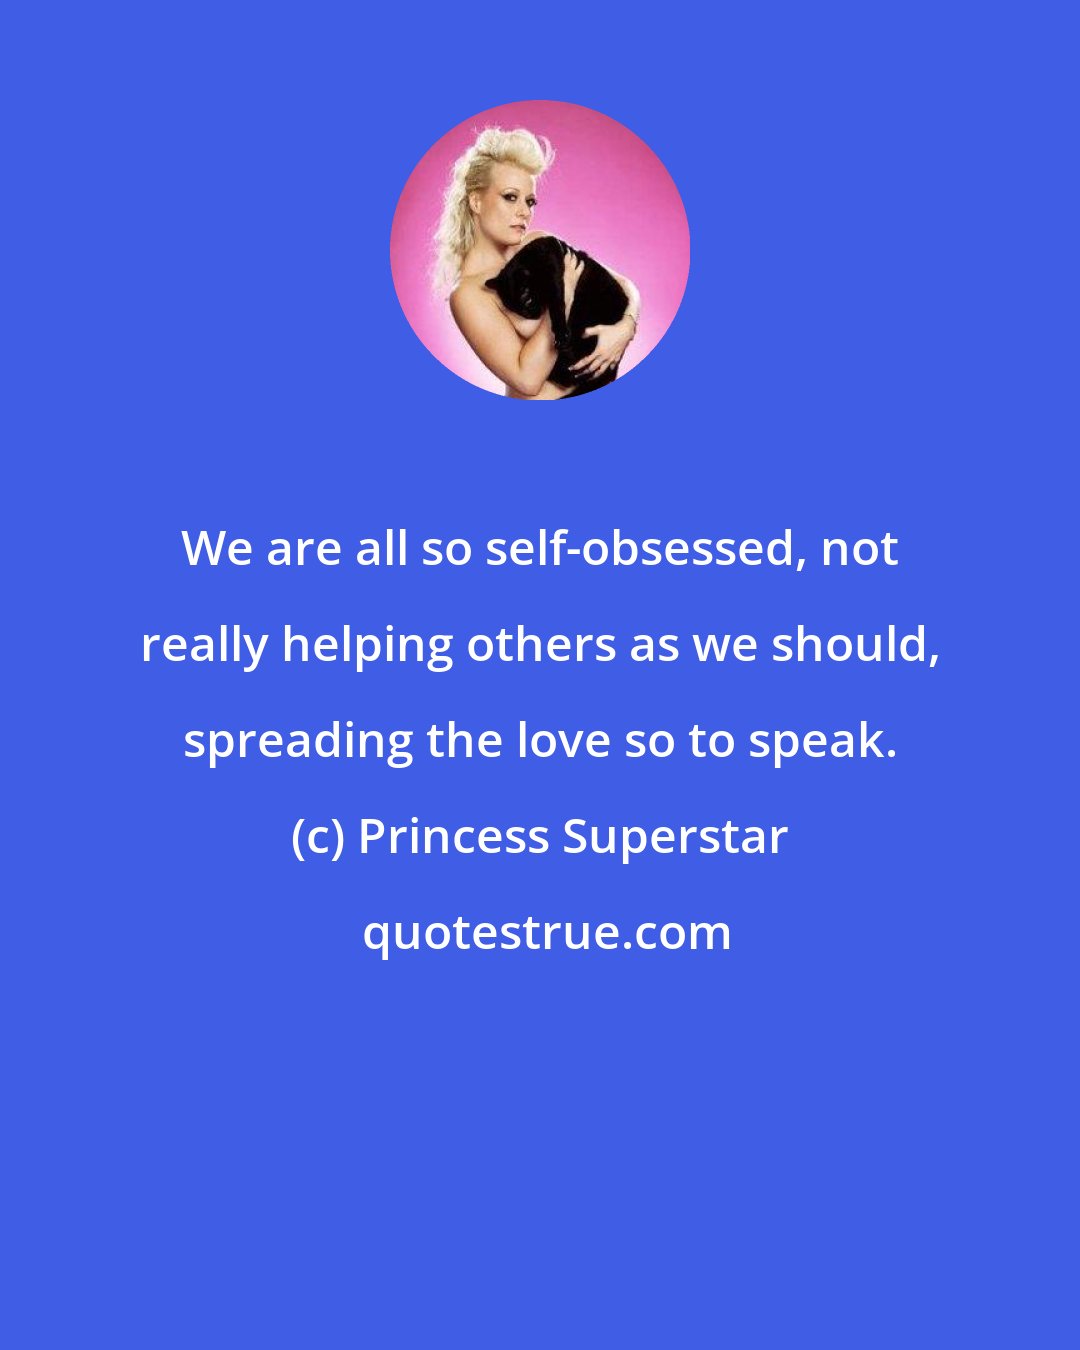 Princess Superstar: We are all so self-obsessed, not really helping others as we should, spreading the love so to speak.